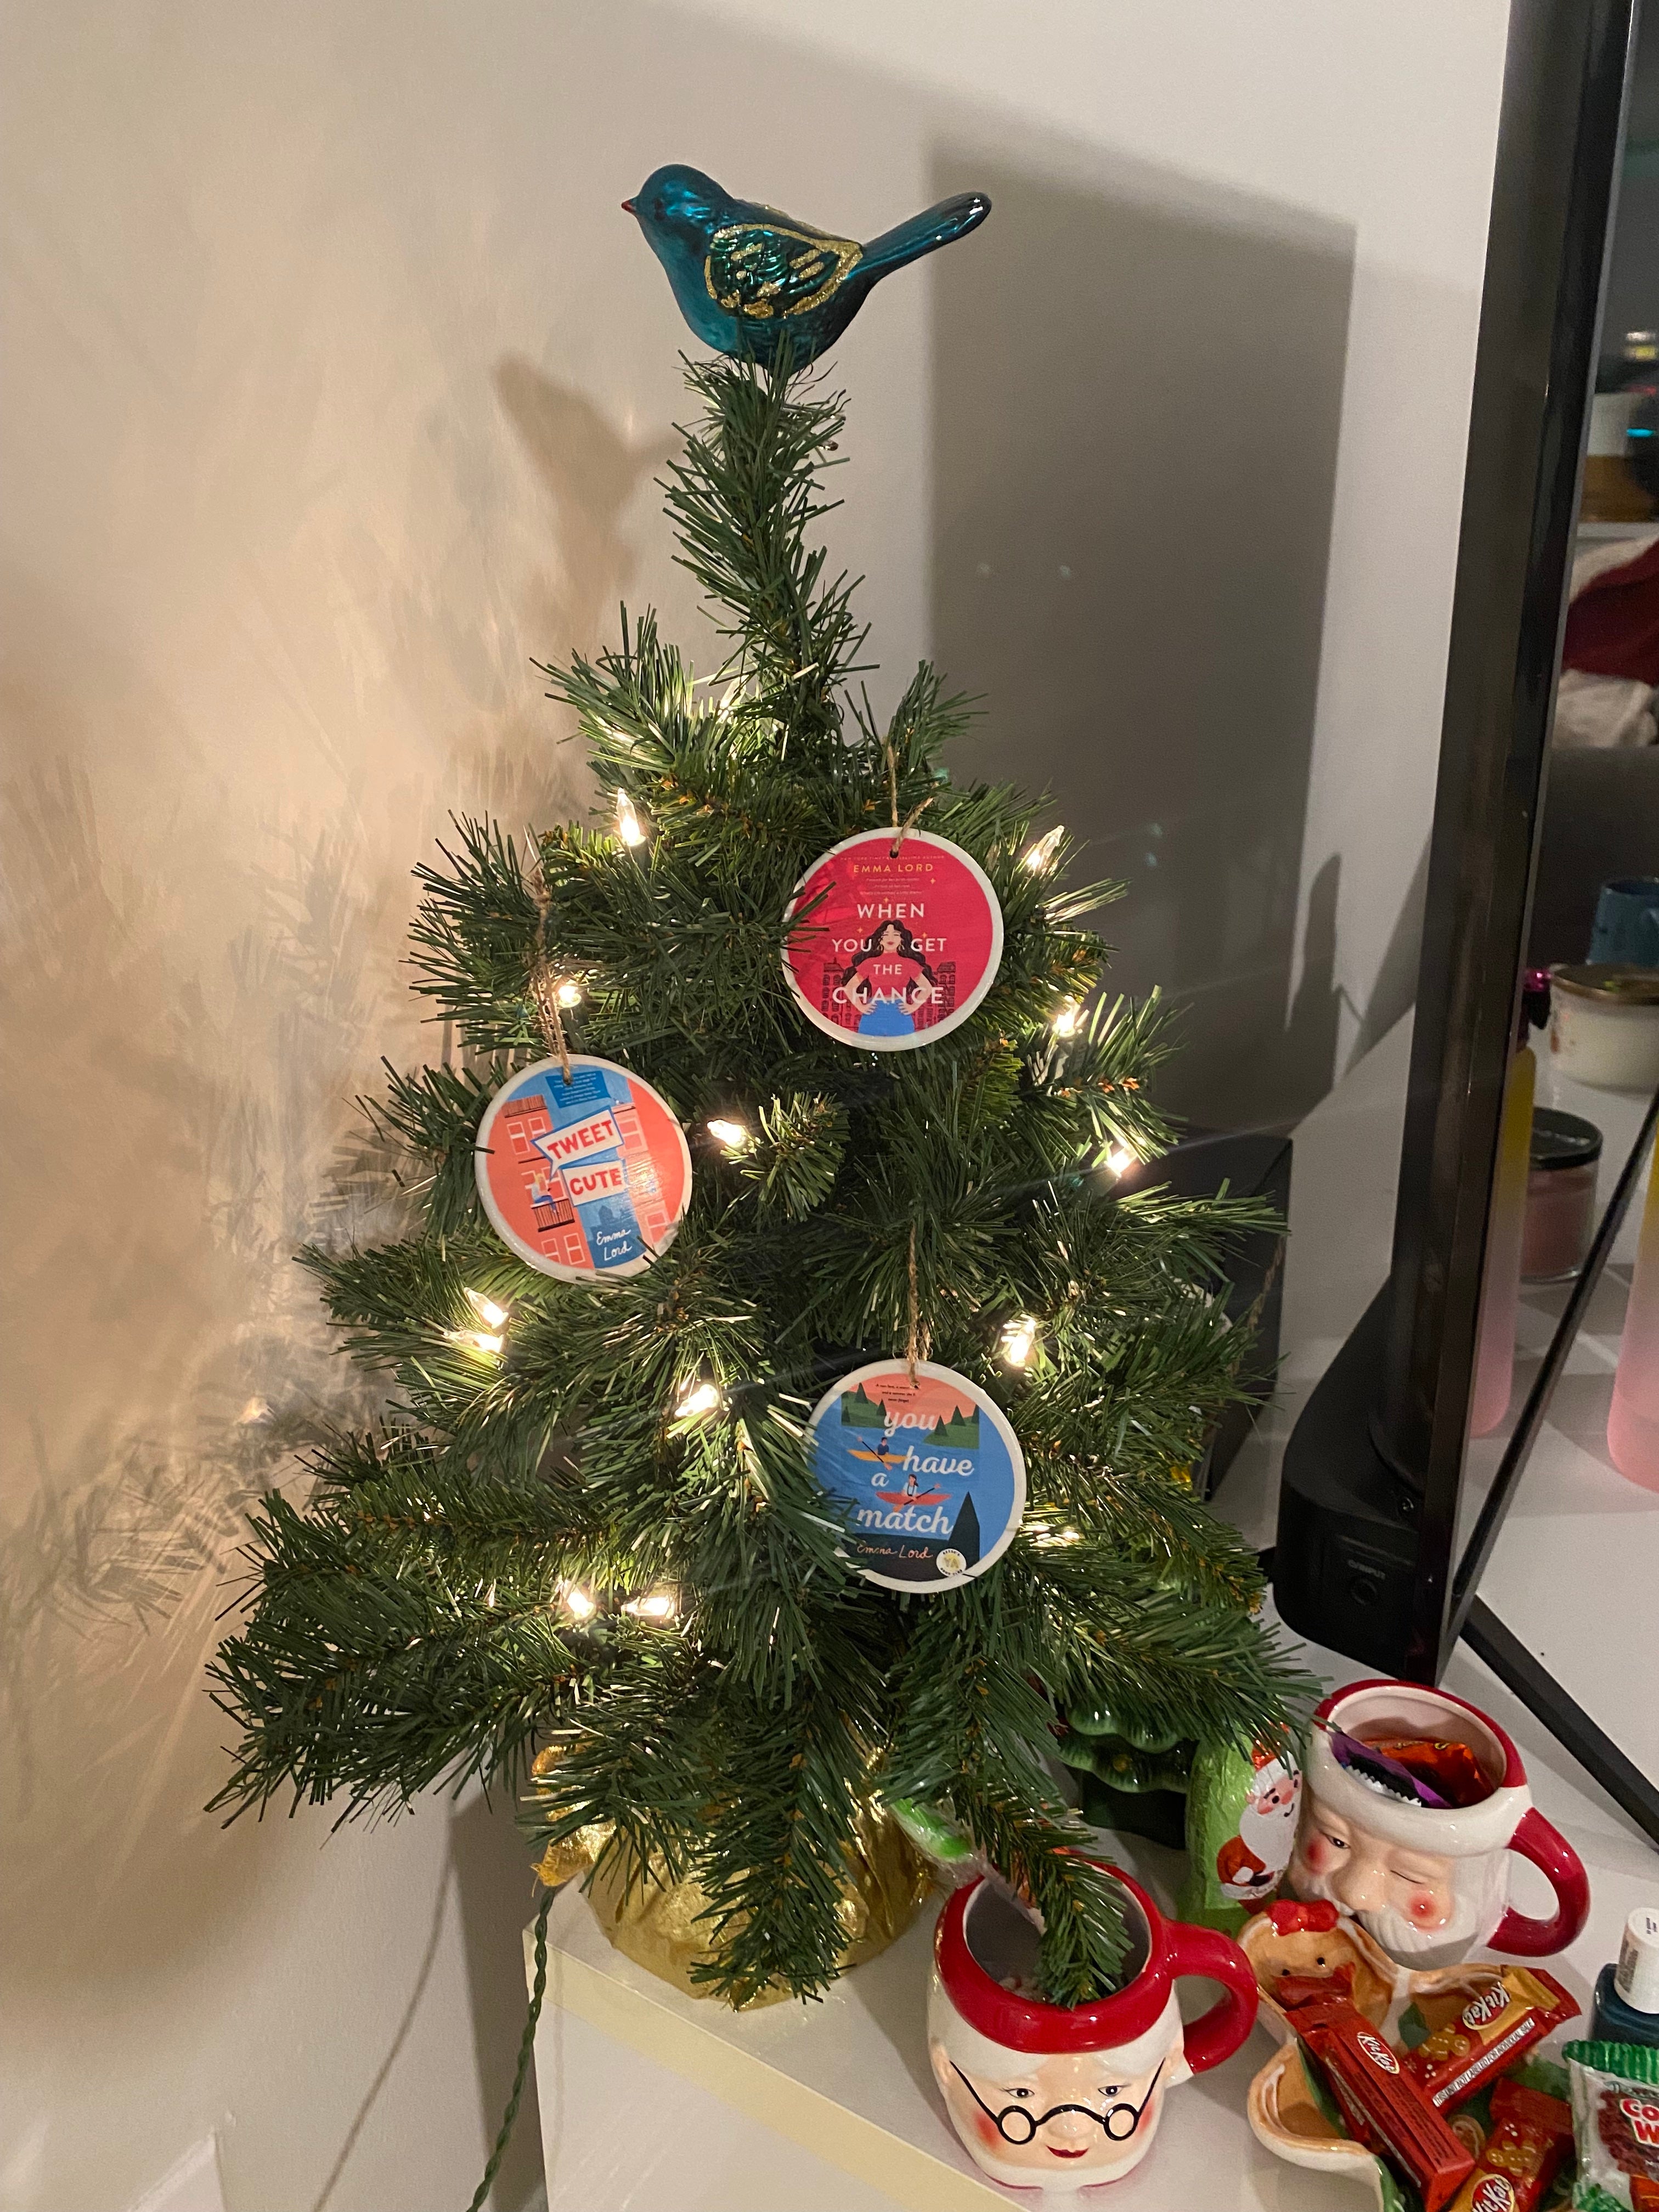 a tiny tree with three circle ornaments on it with emma lord's book covers on each one